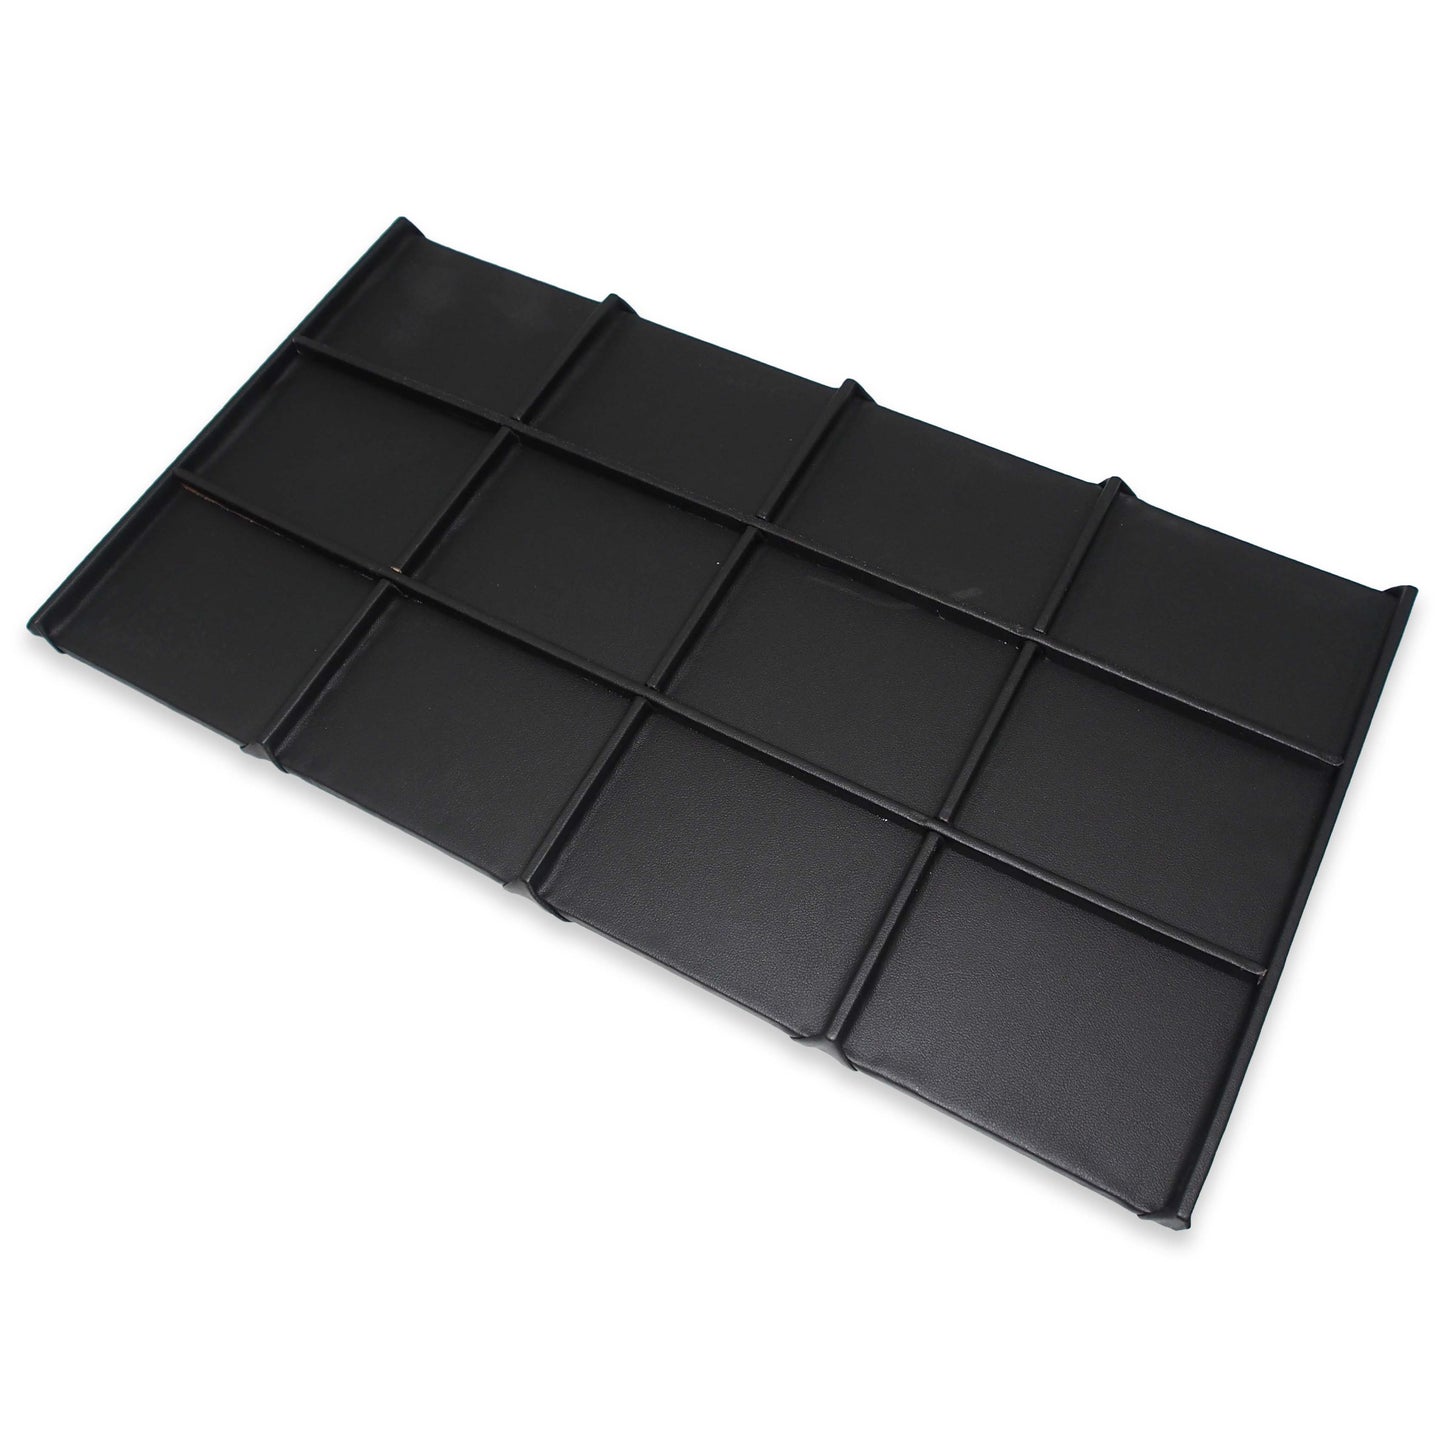 Black Faux Leather 12 Section Jewelry Deluxe Tray Insert Liner